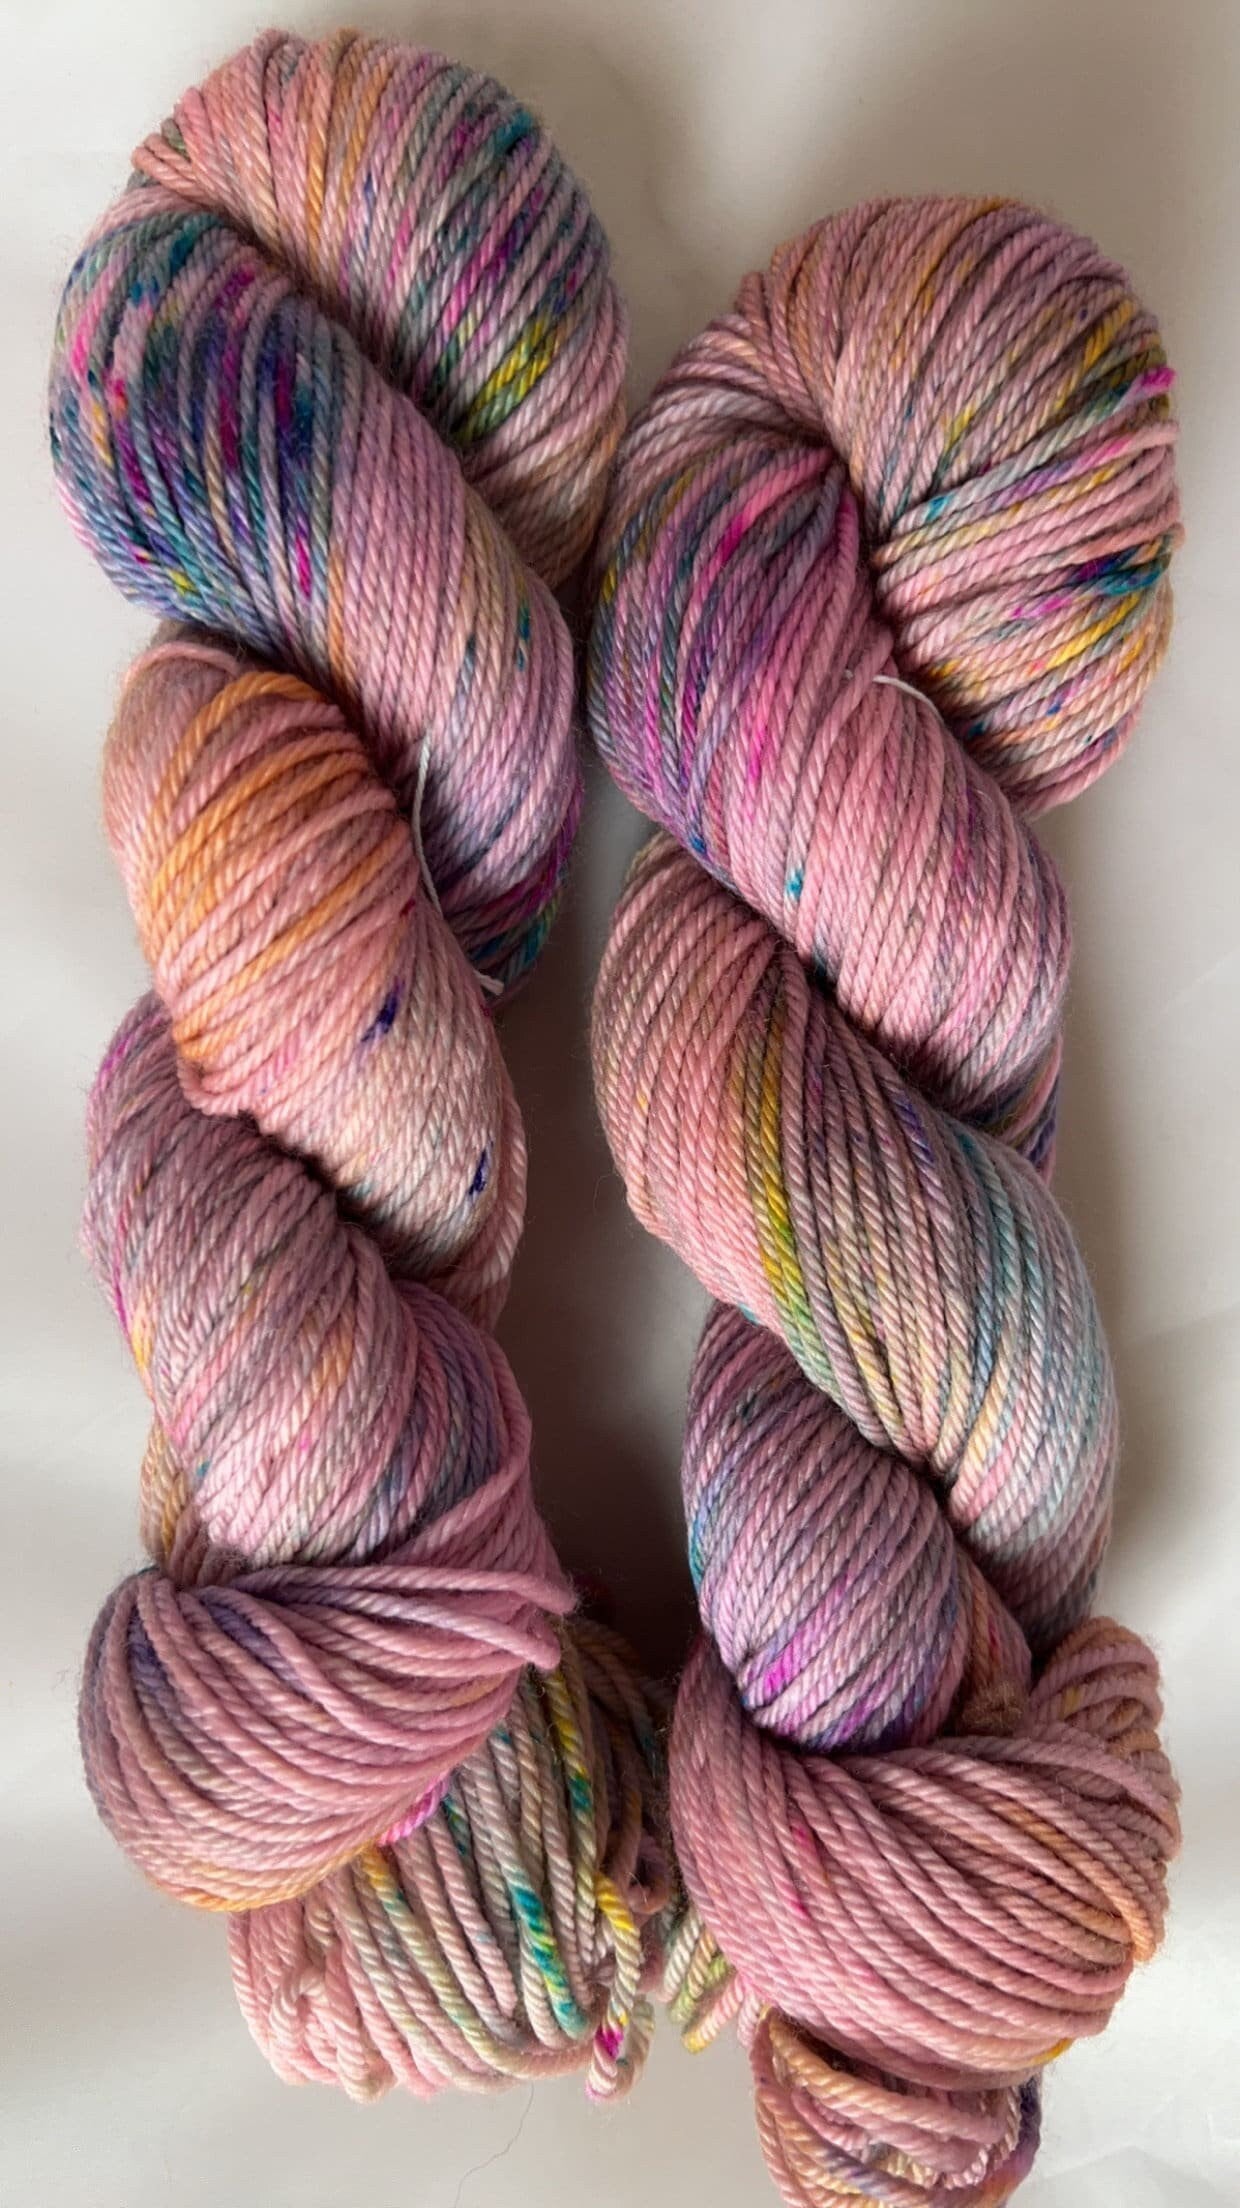 Hand-Dyed Merino Wool Yarn - Soft and Durable Yarn for Knitting and Crocheting | Indie Dyed Merino Wool | Worsted | Carnival